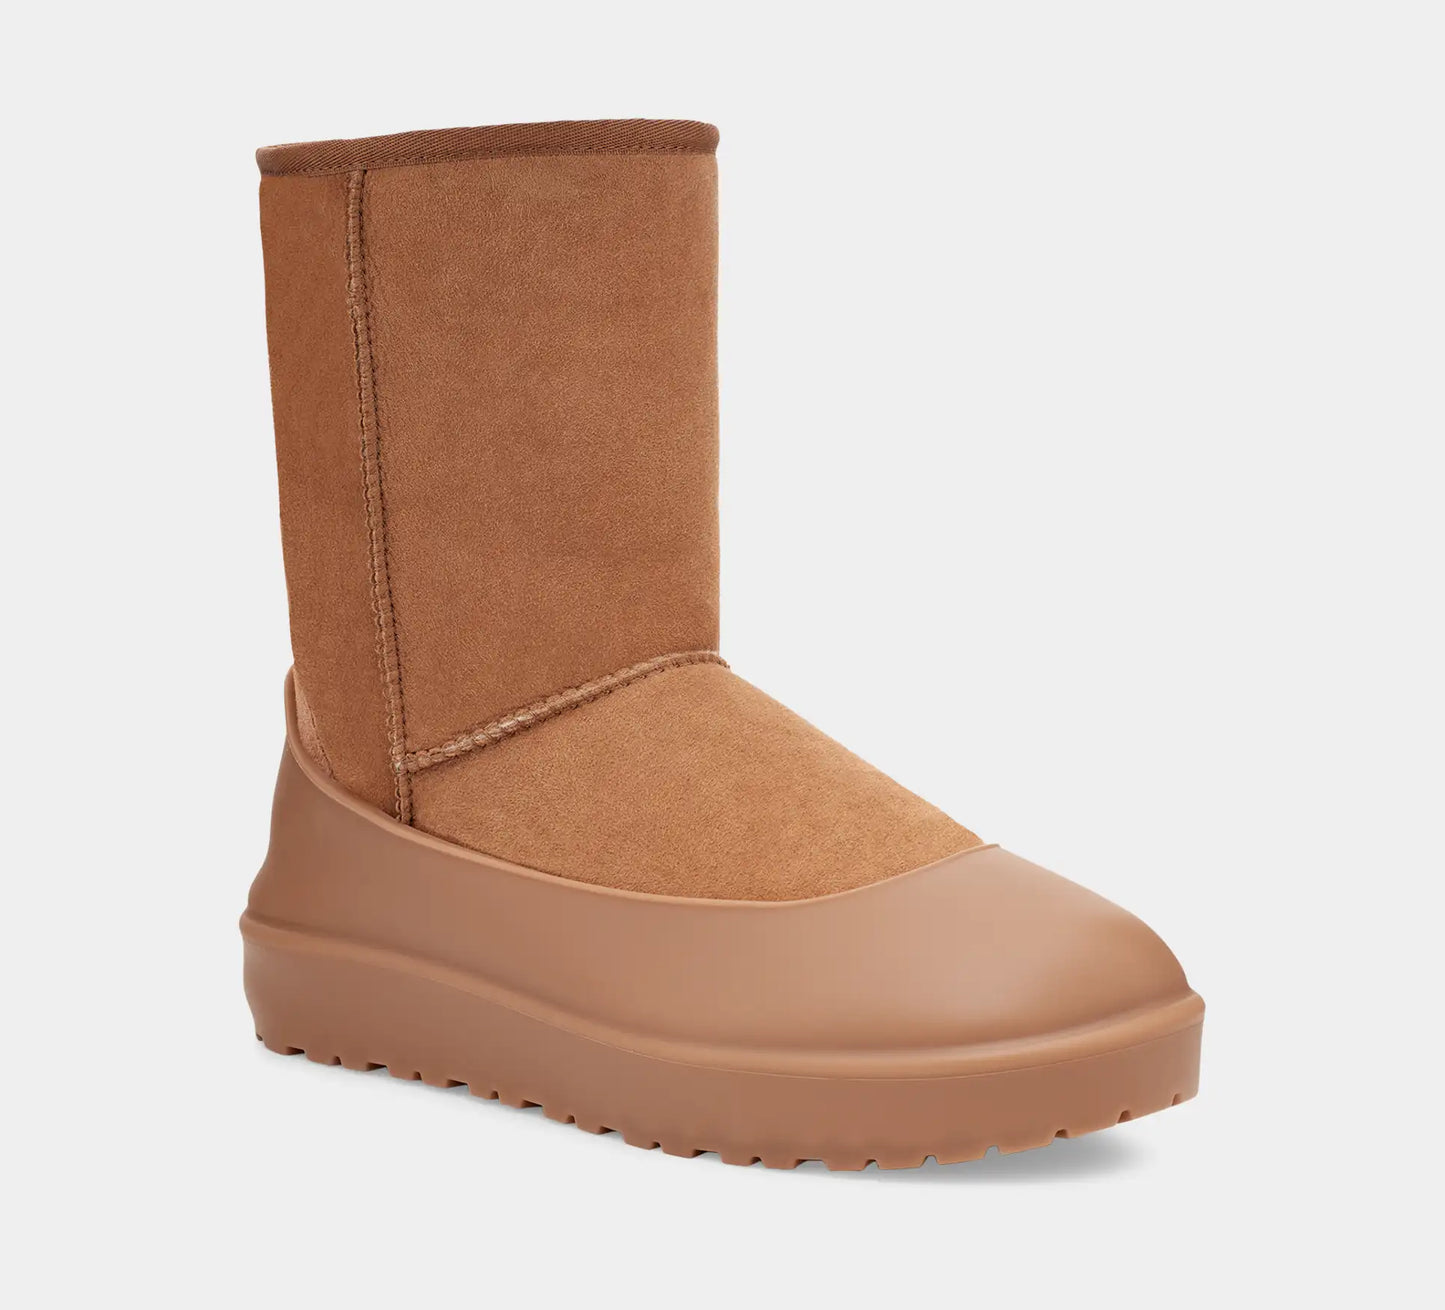 Ugg "All Gender Boot Cover"